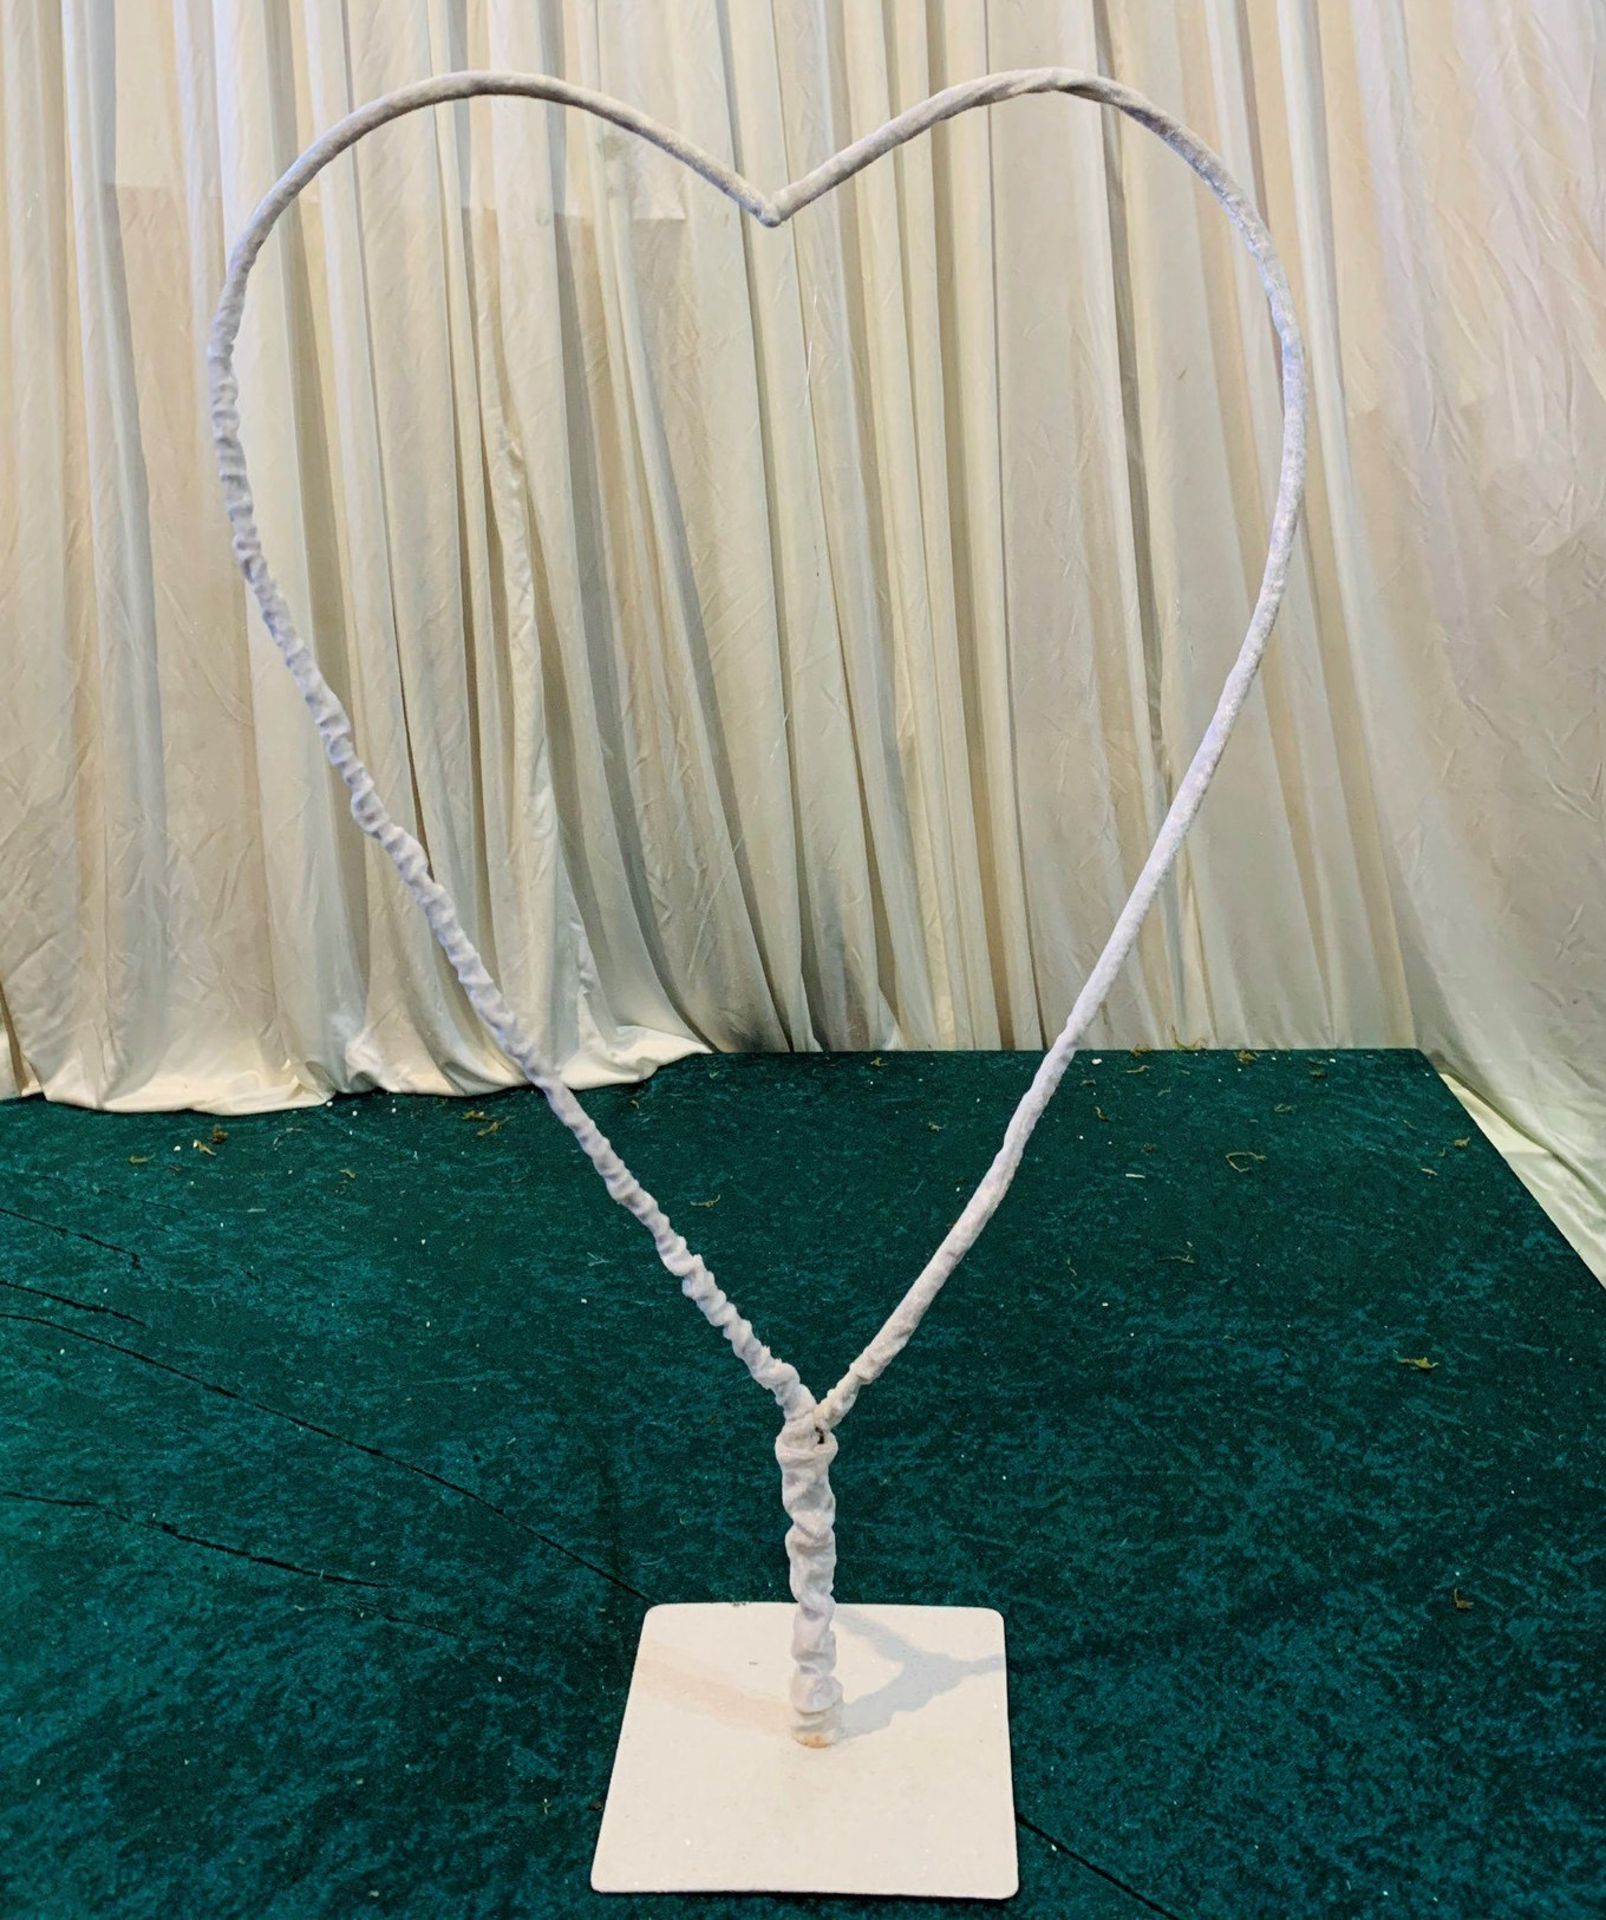 4 x Wire Heart Display Stands - Dimensions: 75x46cm - Ref: Lot 90 - CL548 - Location: Near Market